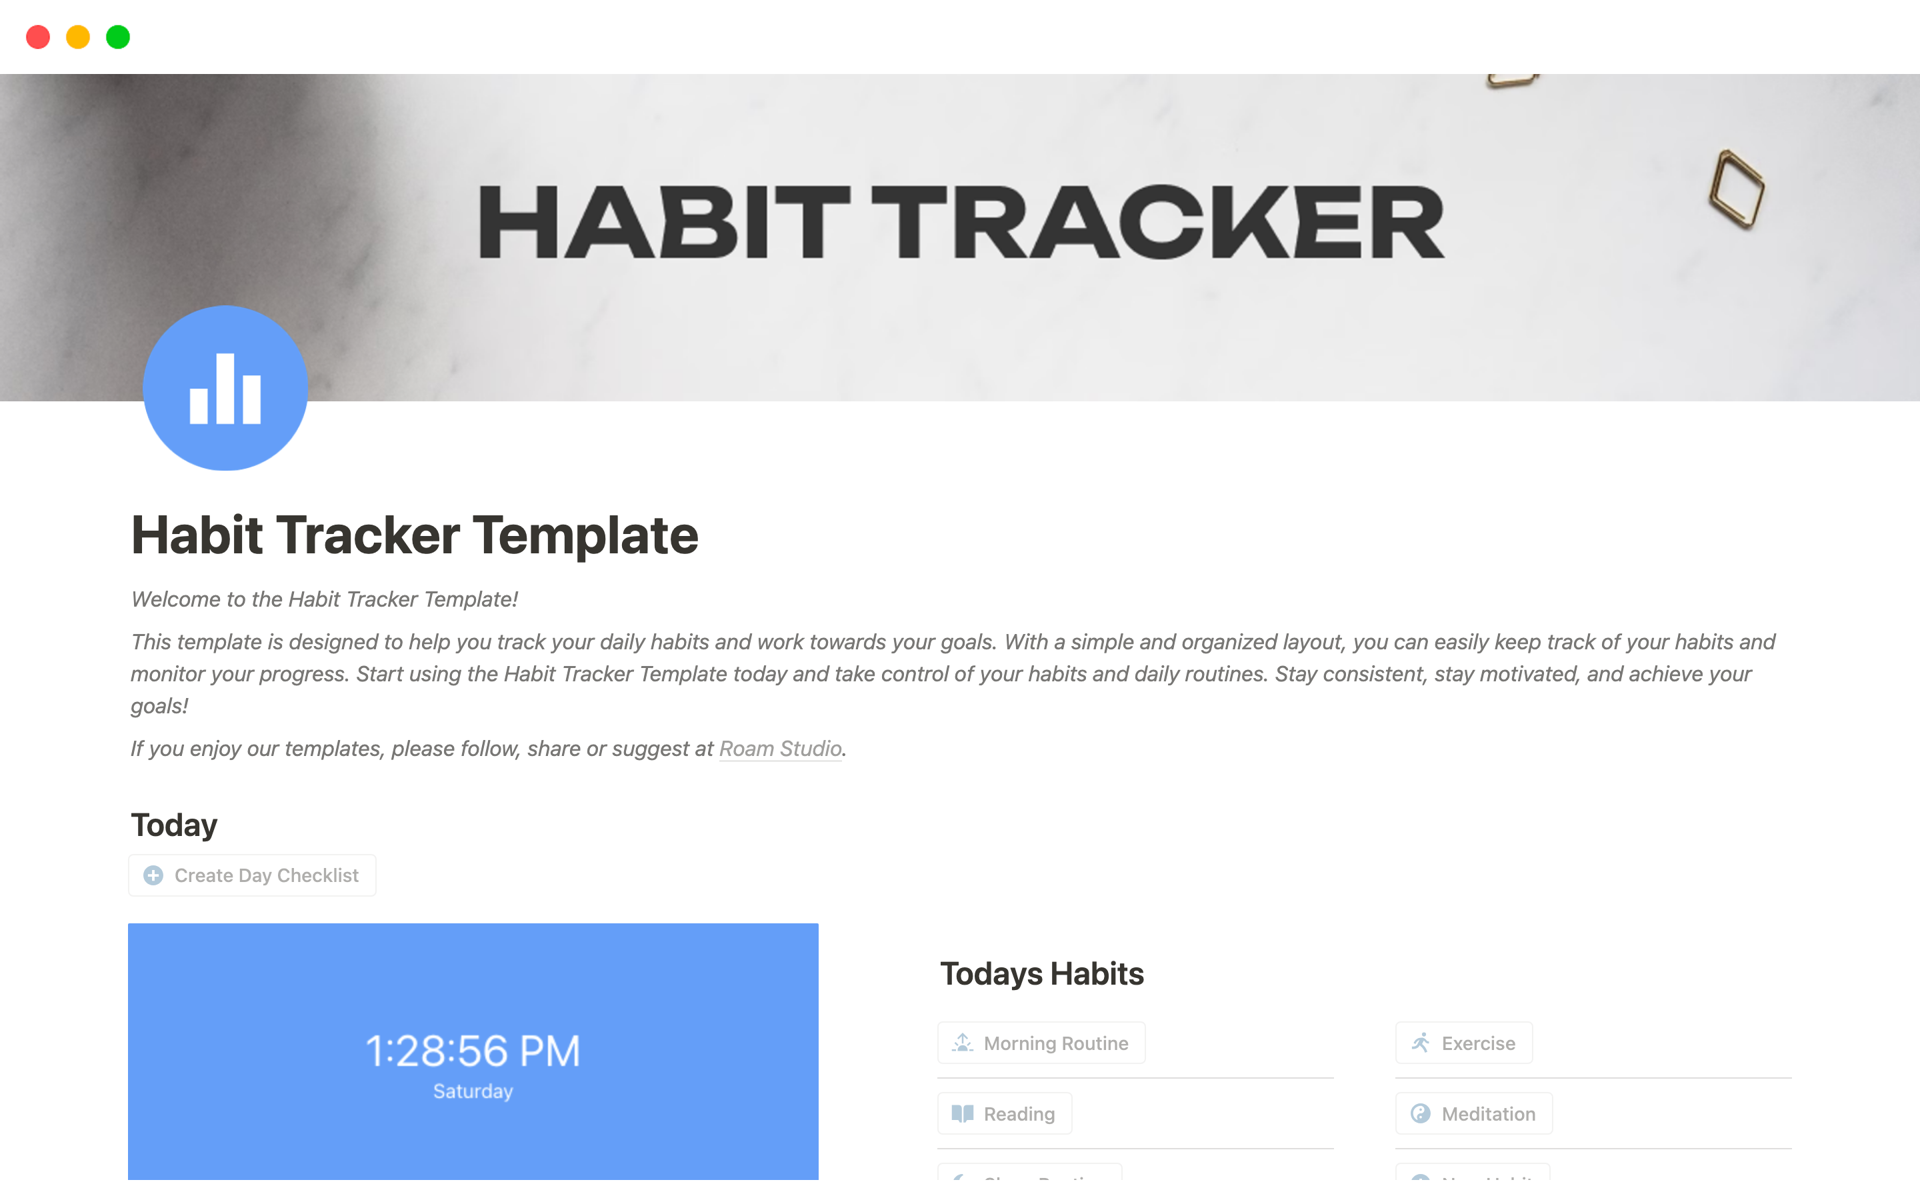 This template is designed to help you track your daily habits and work towards your goals.